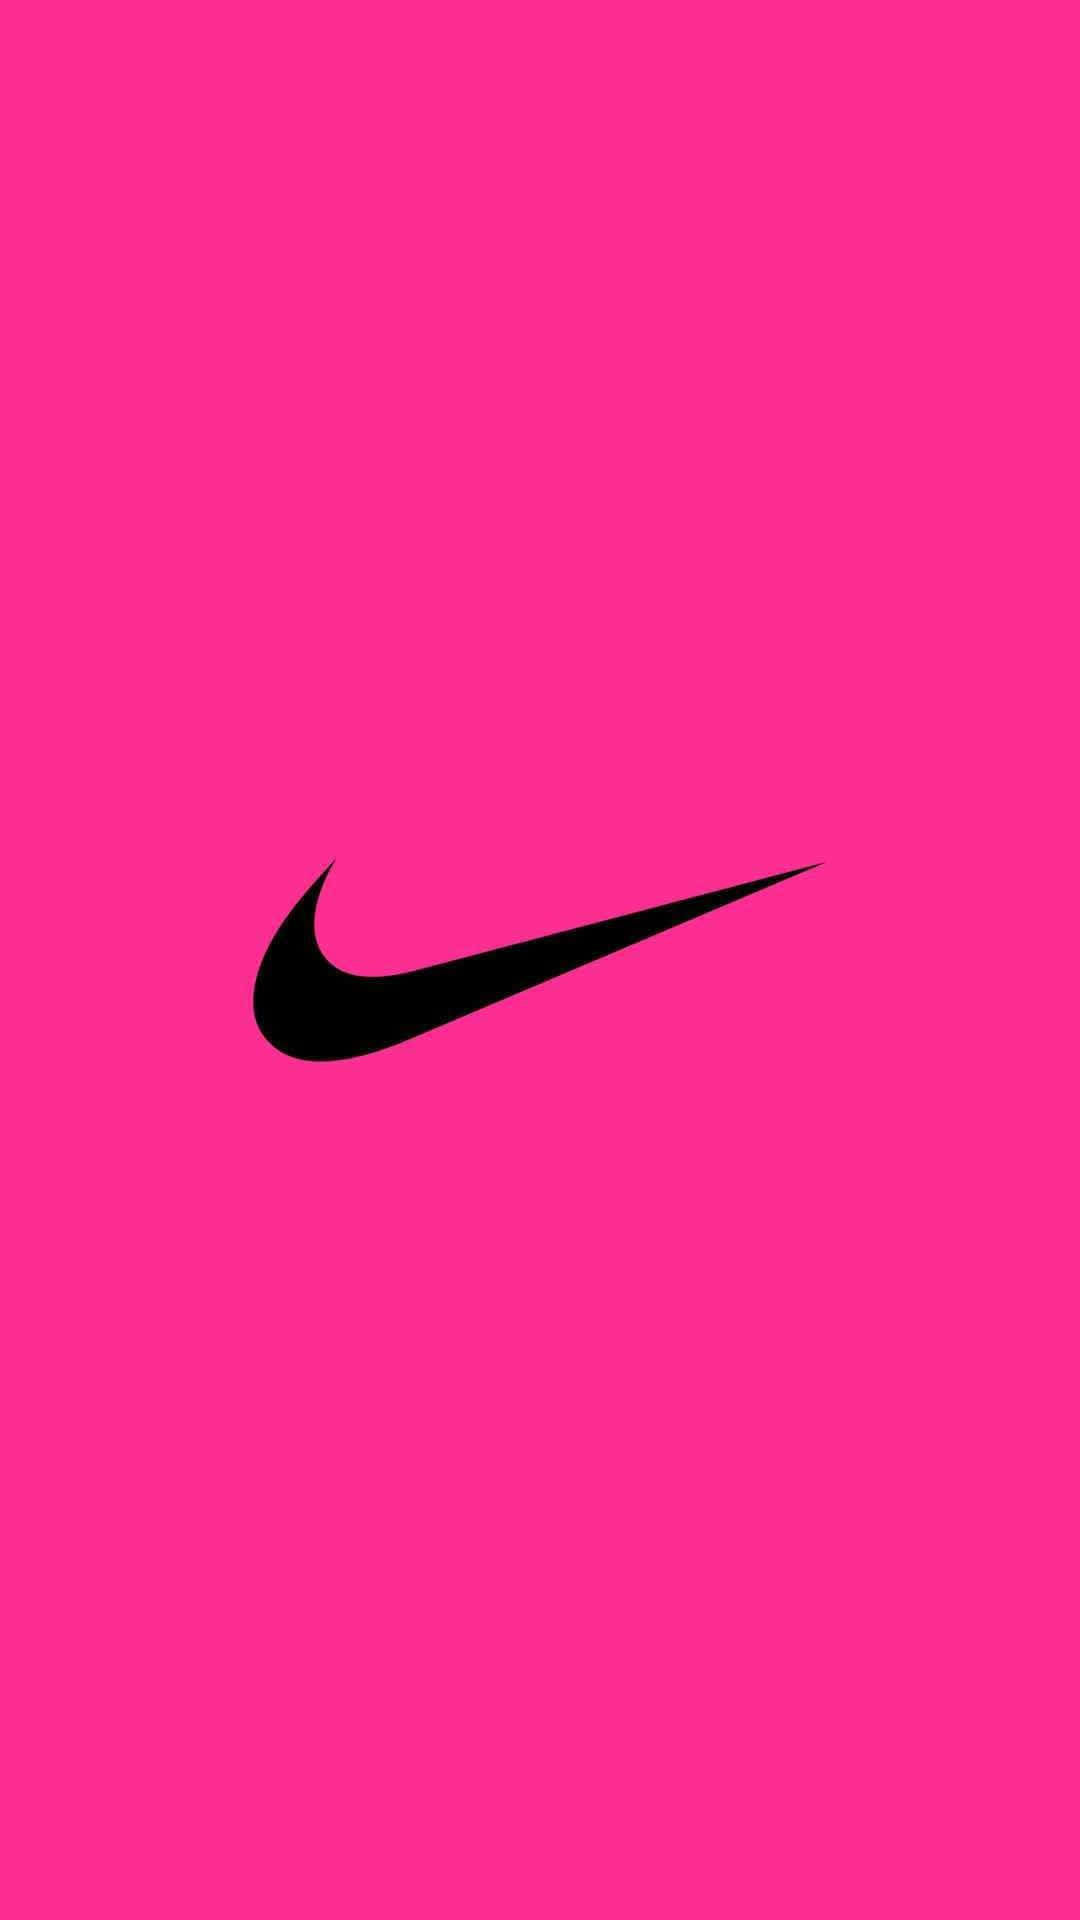 Nike Logo On A Pink Background Wallpaper